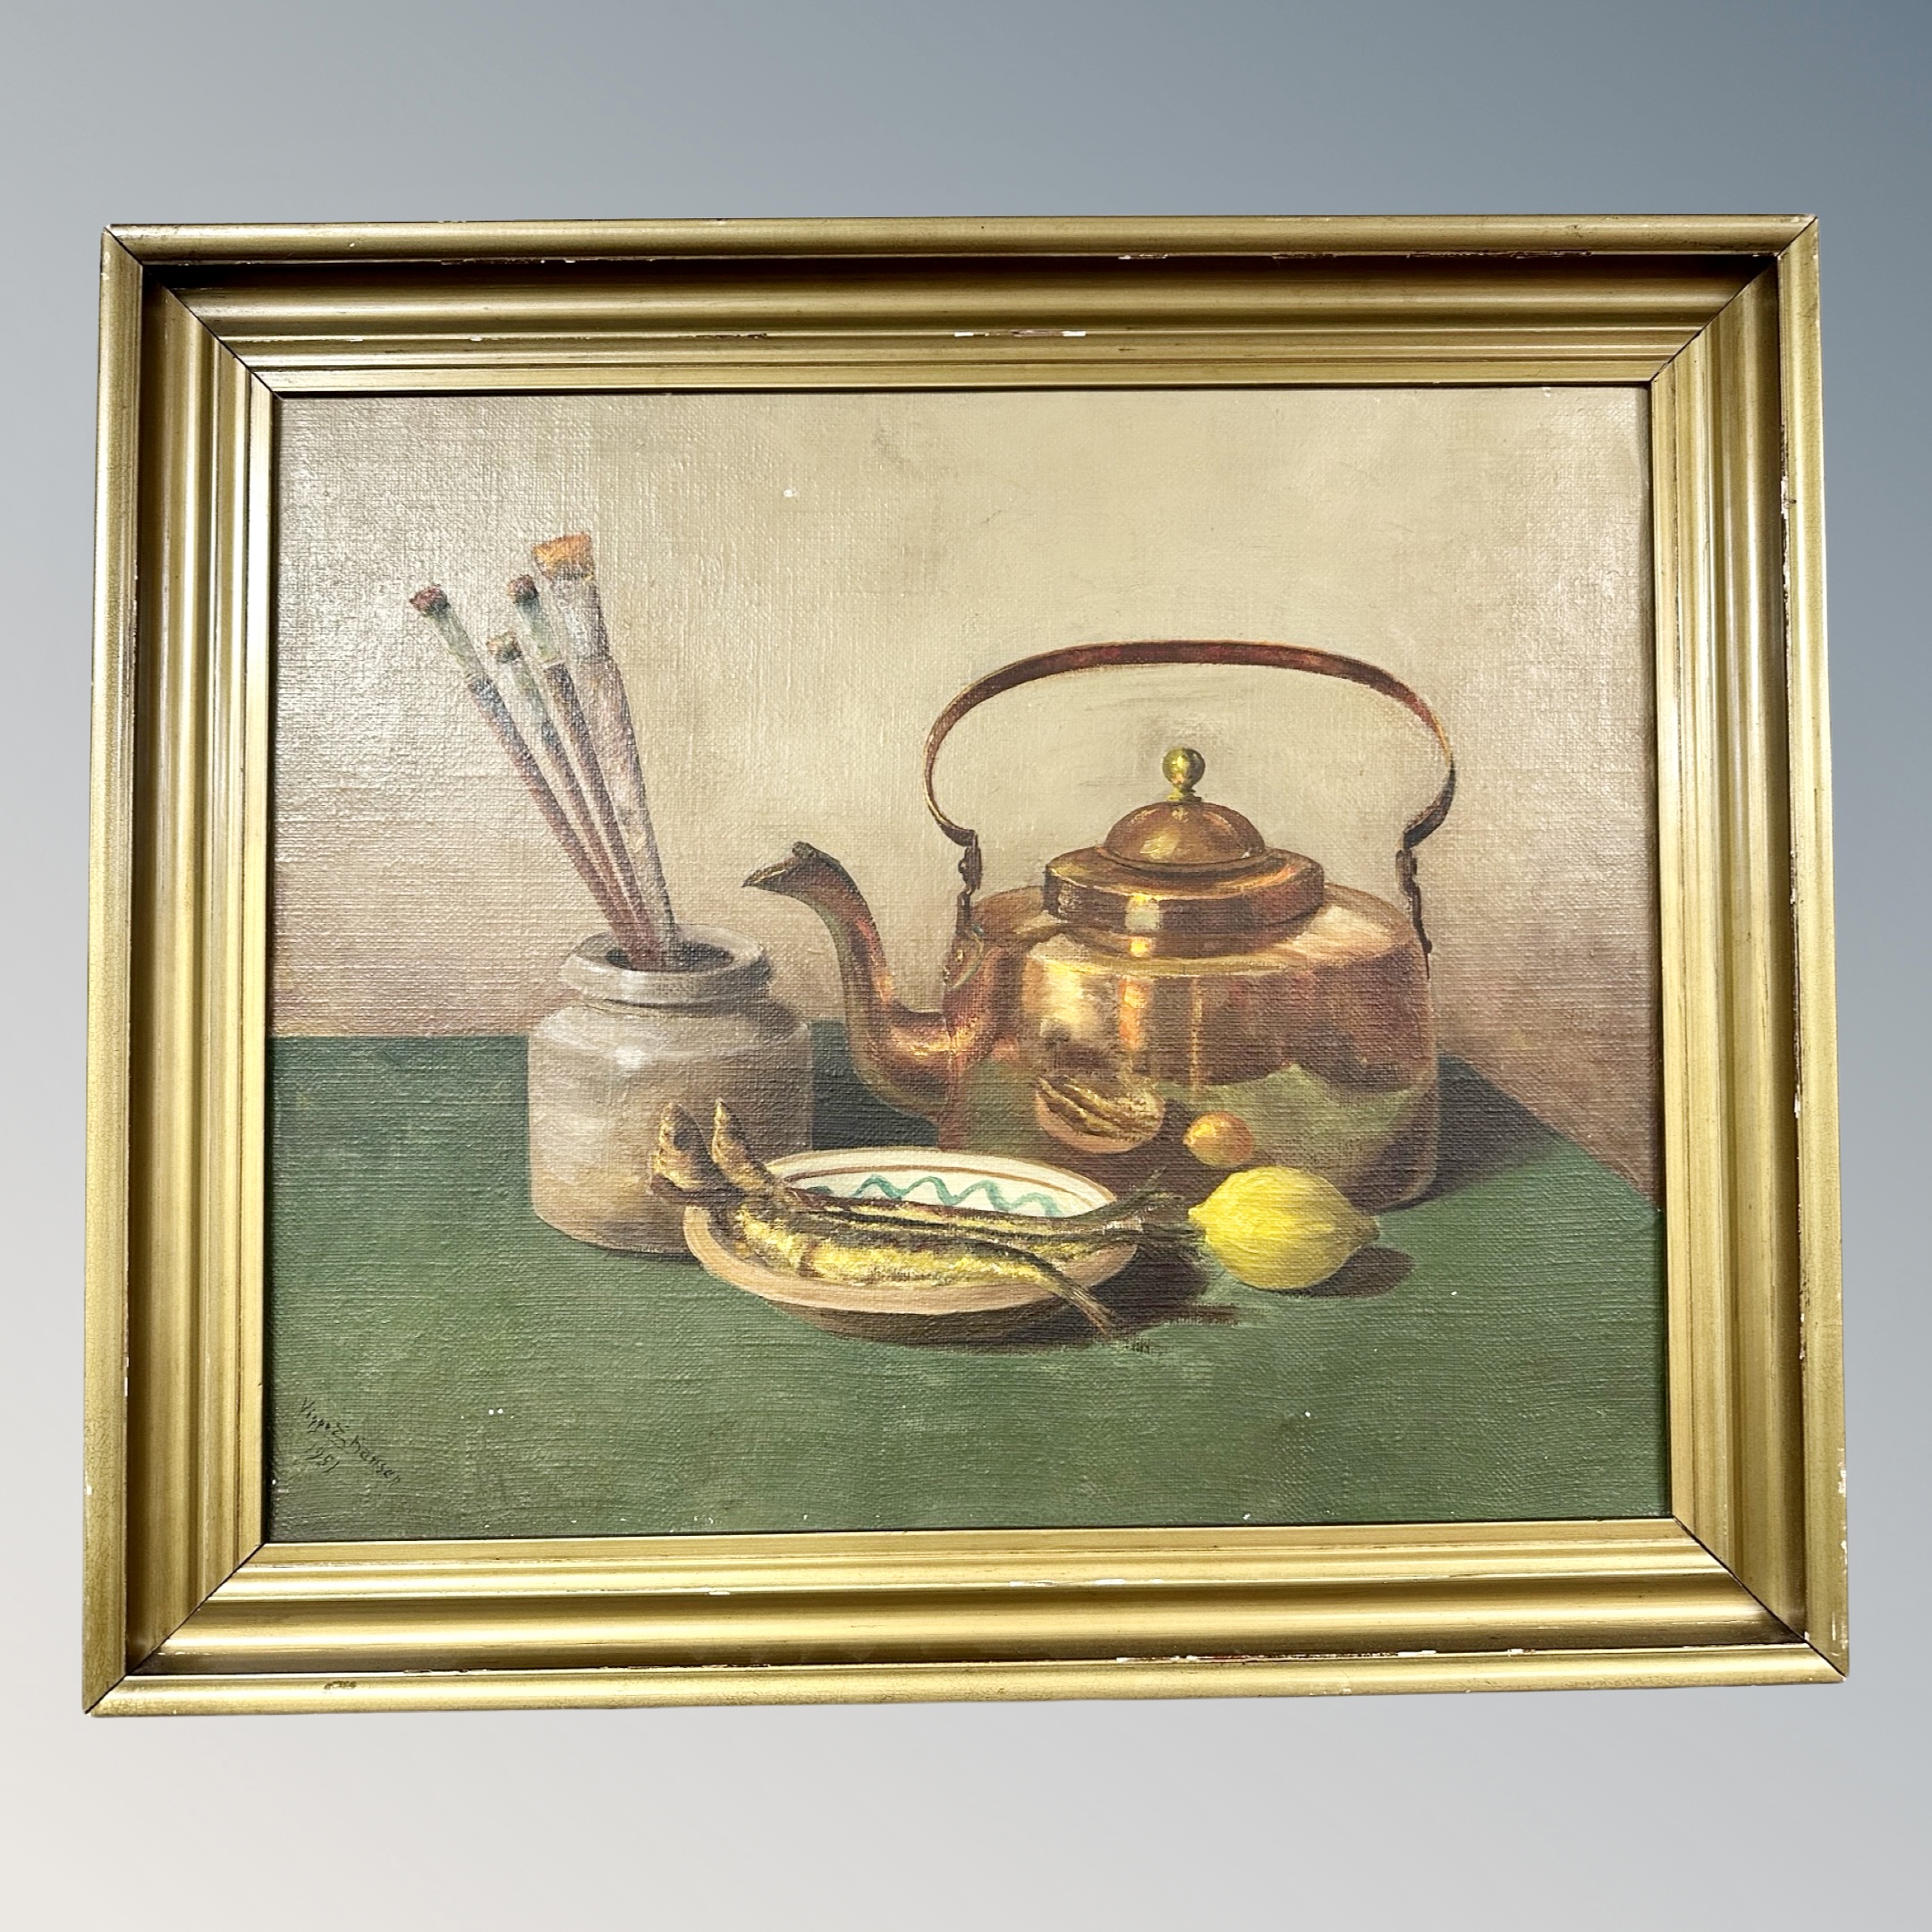 Viggo Dansen : Still life of copper kettle and fishes in bowl, oil on canvas, 53 cm x 43 cm, - Image 2 of 2